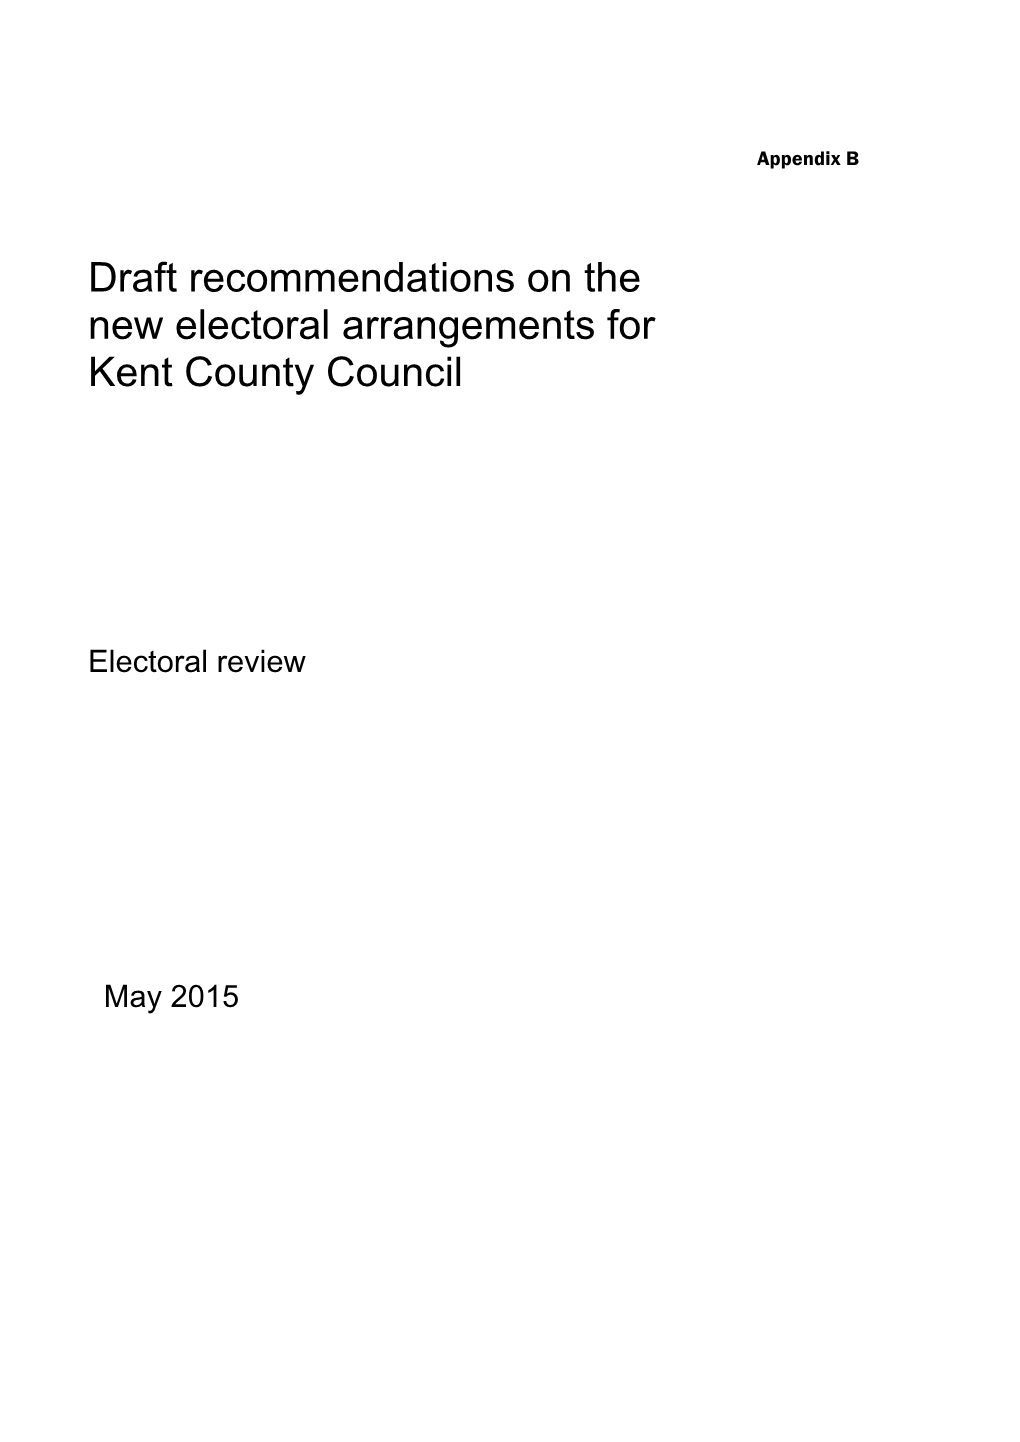 Draft Recommendations on the New Electoral Arrangements for Kent County Council